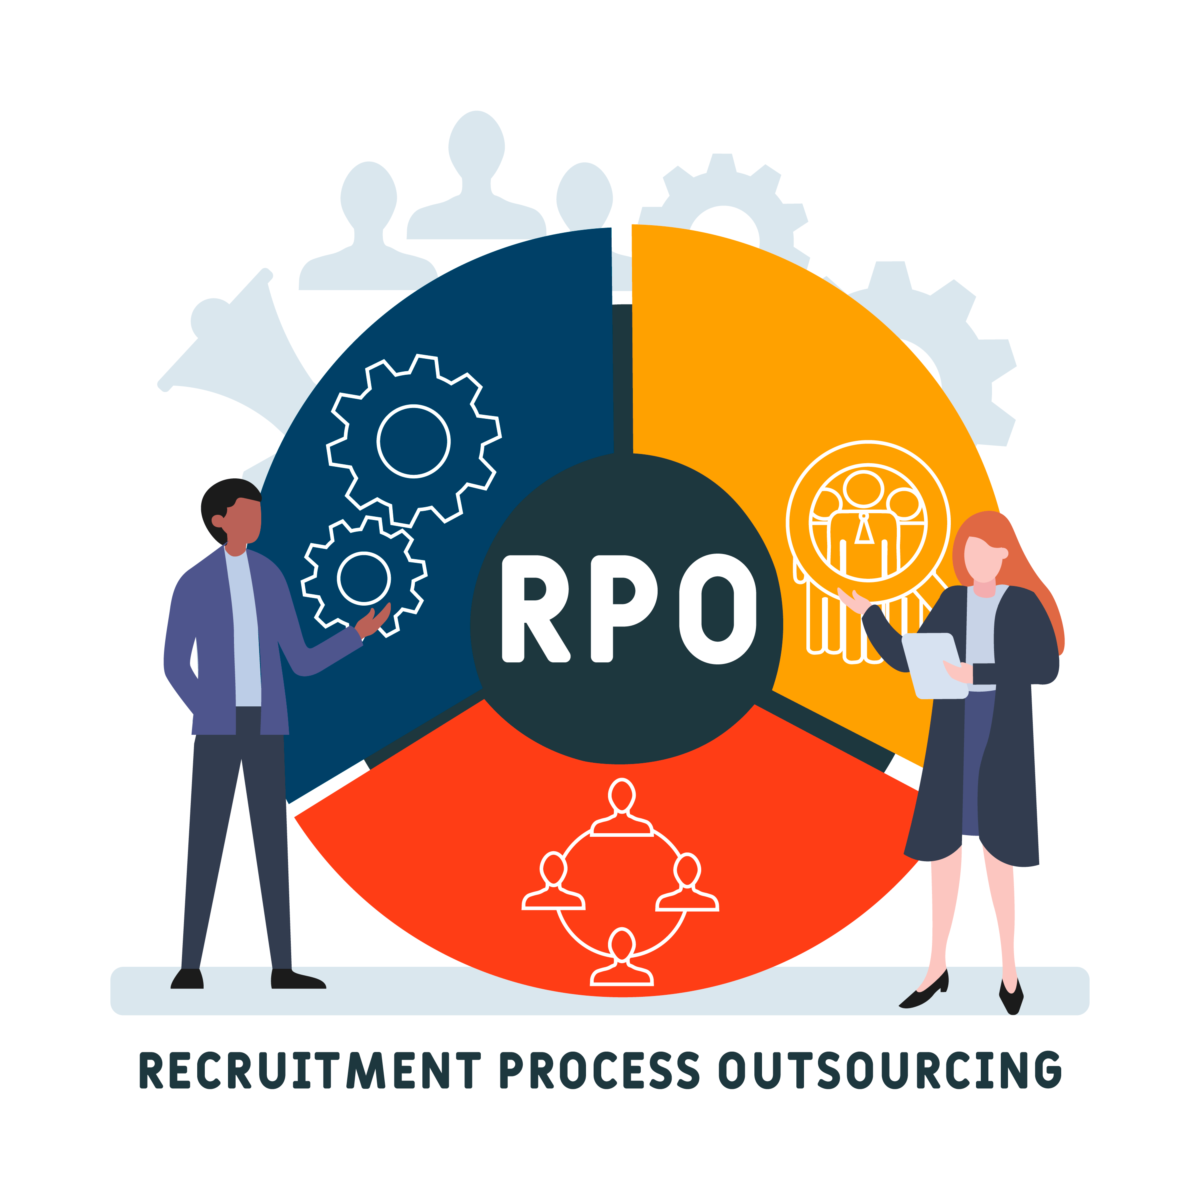 Recruitment Process Outsourcing (RPO) – The most result-oriented option for enterprises that want to scale rapidly